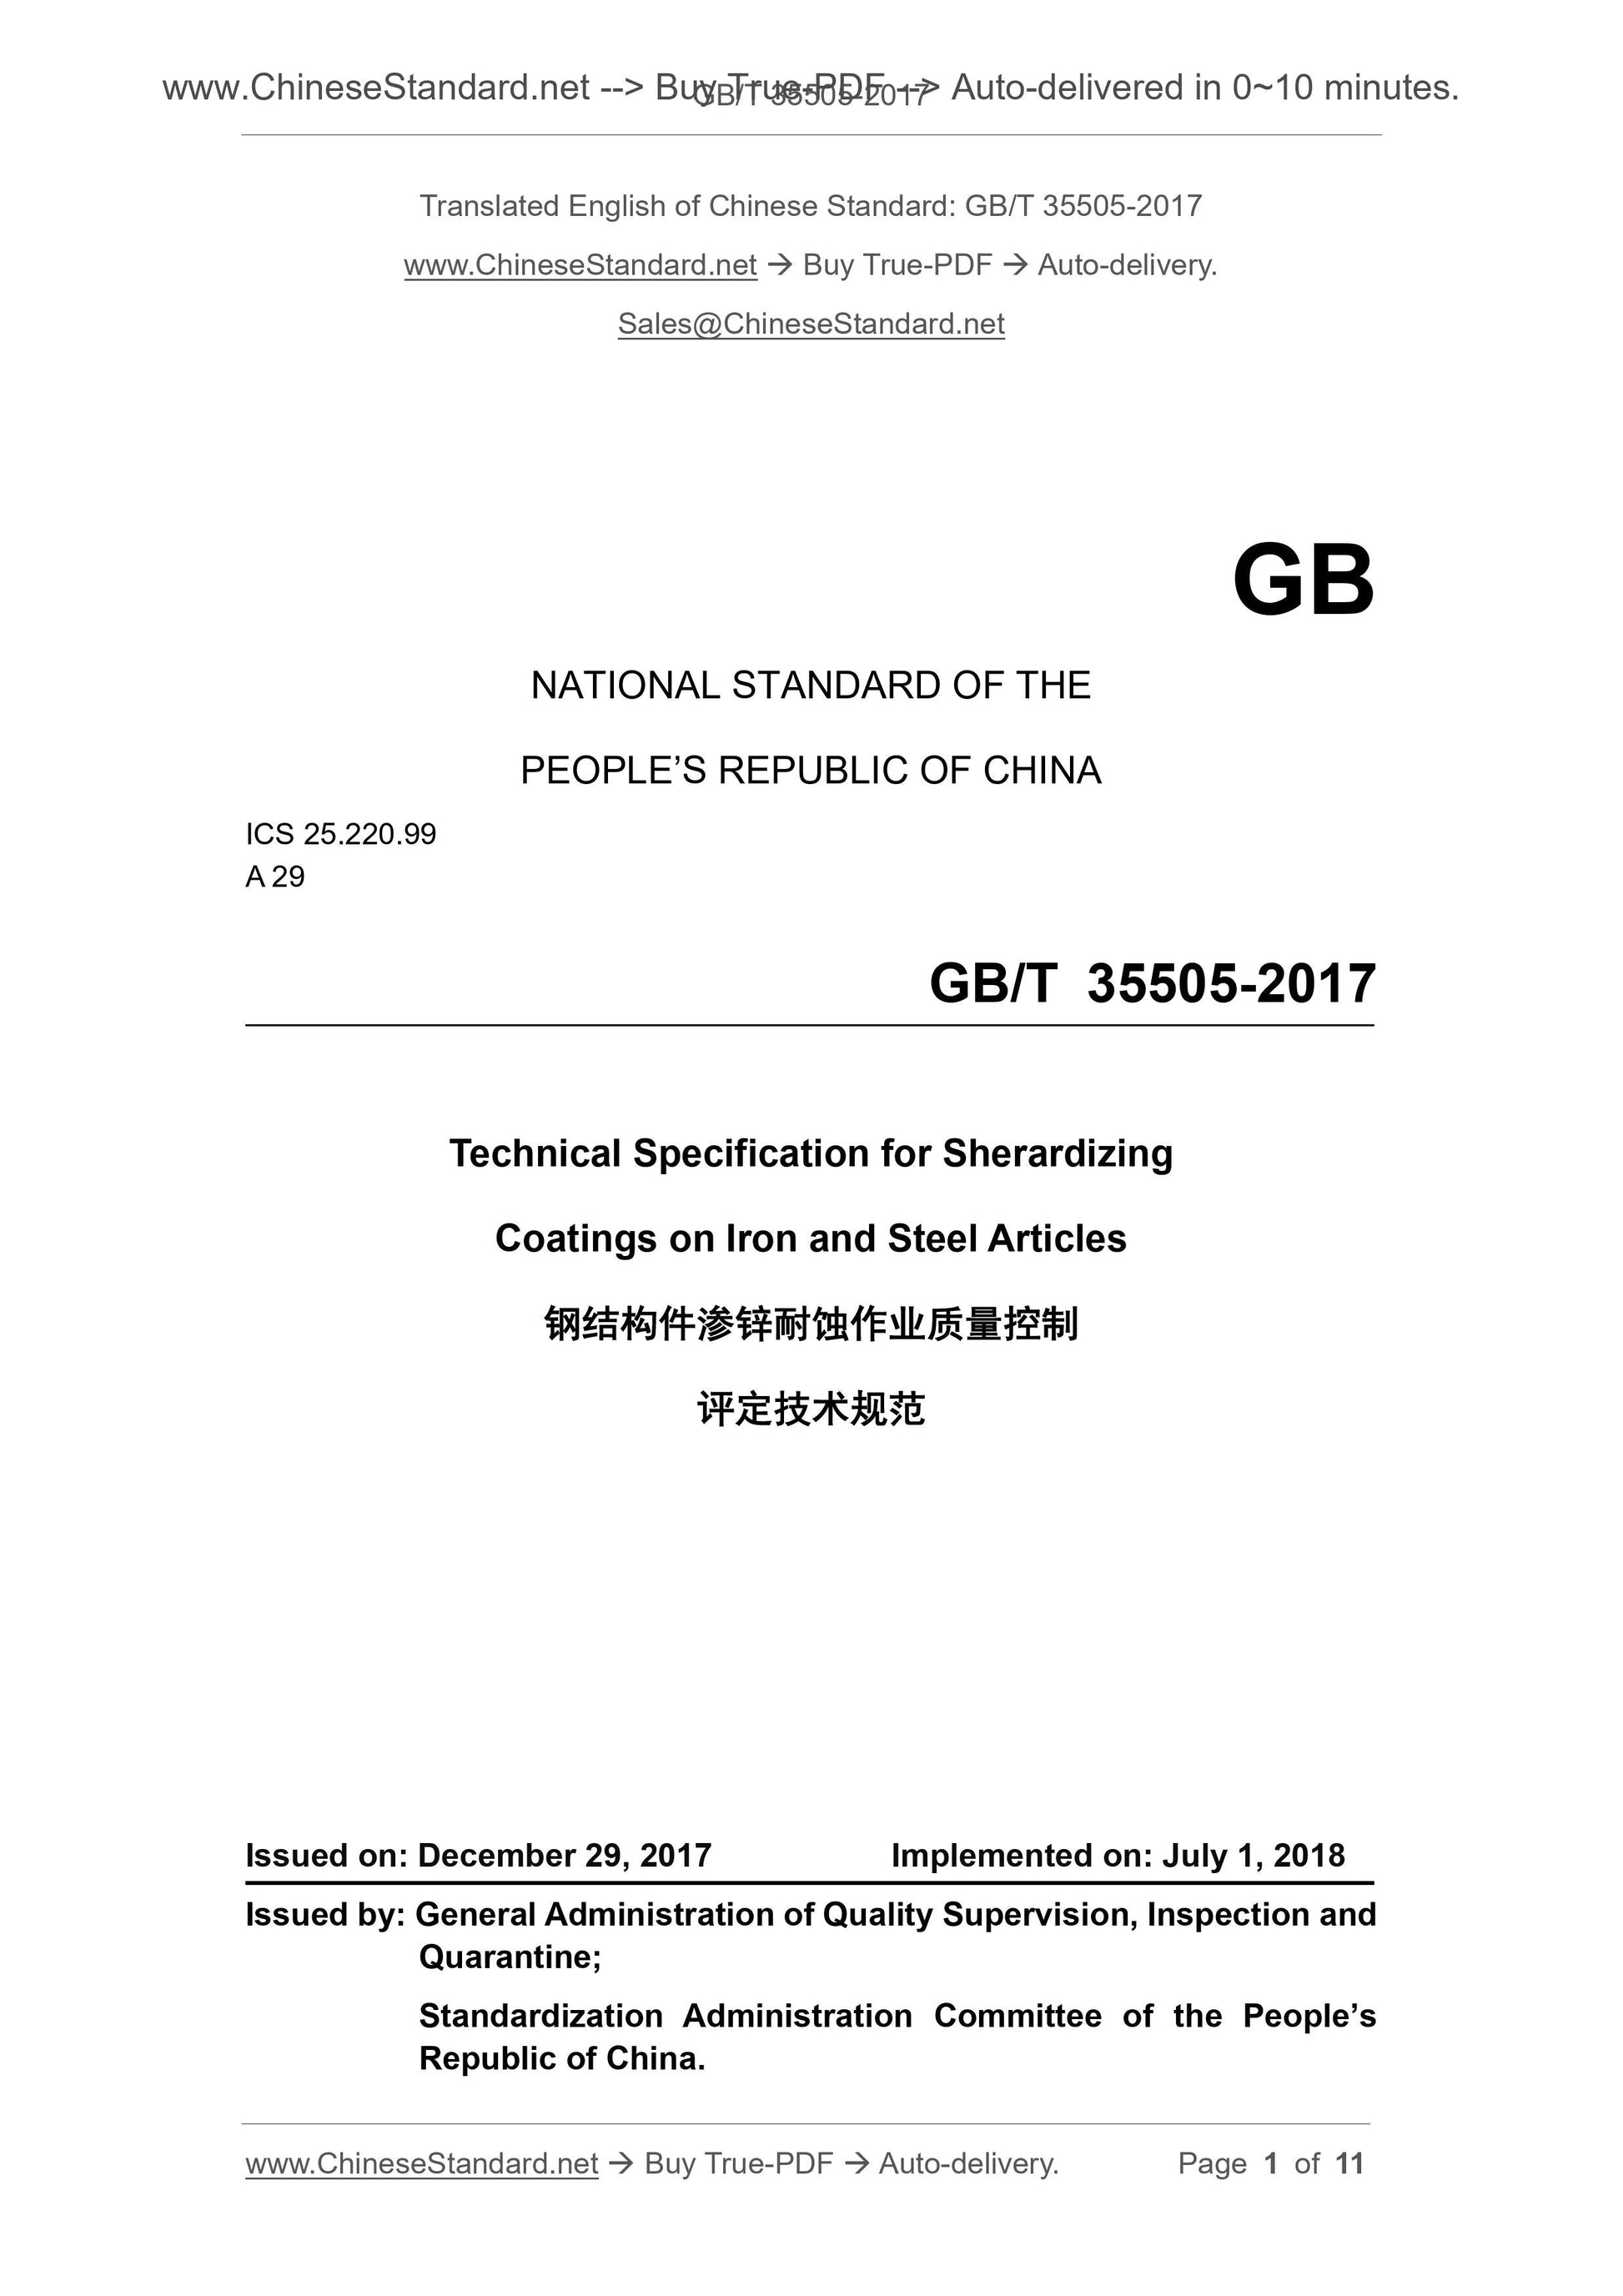 GB/T 35505-2017 Page 1